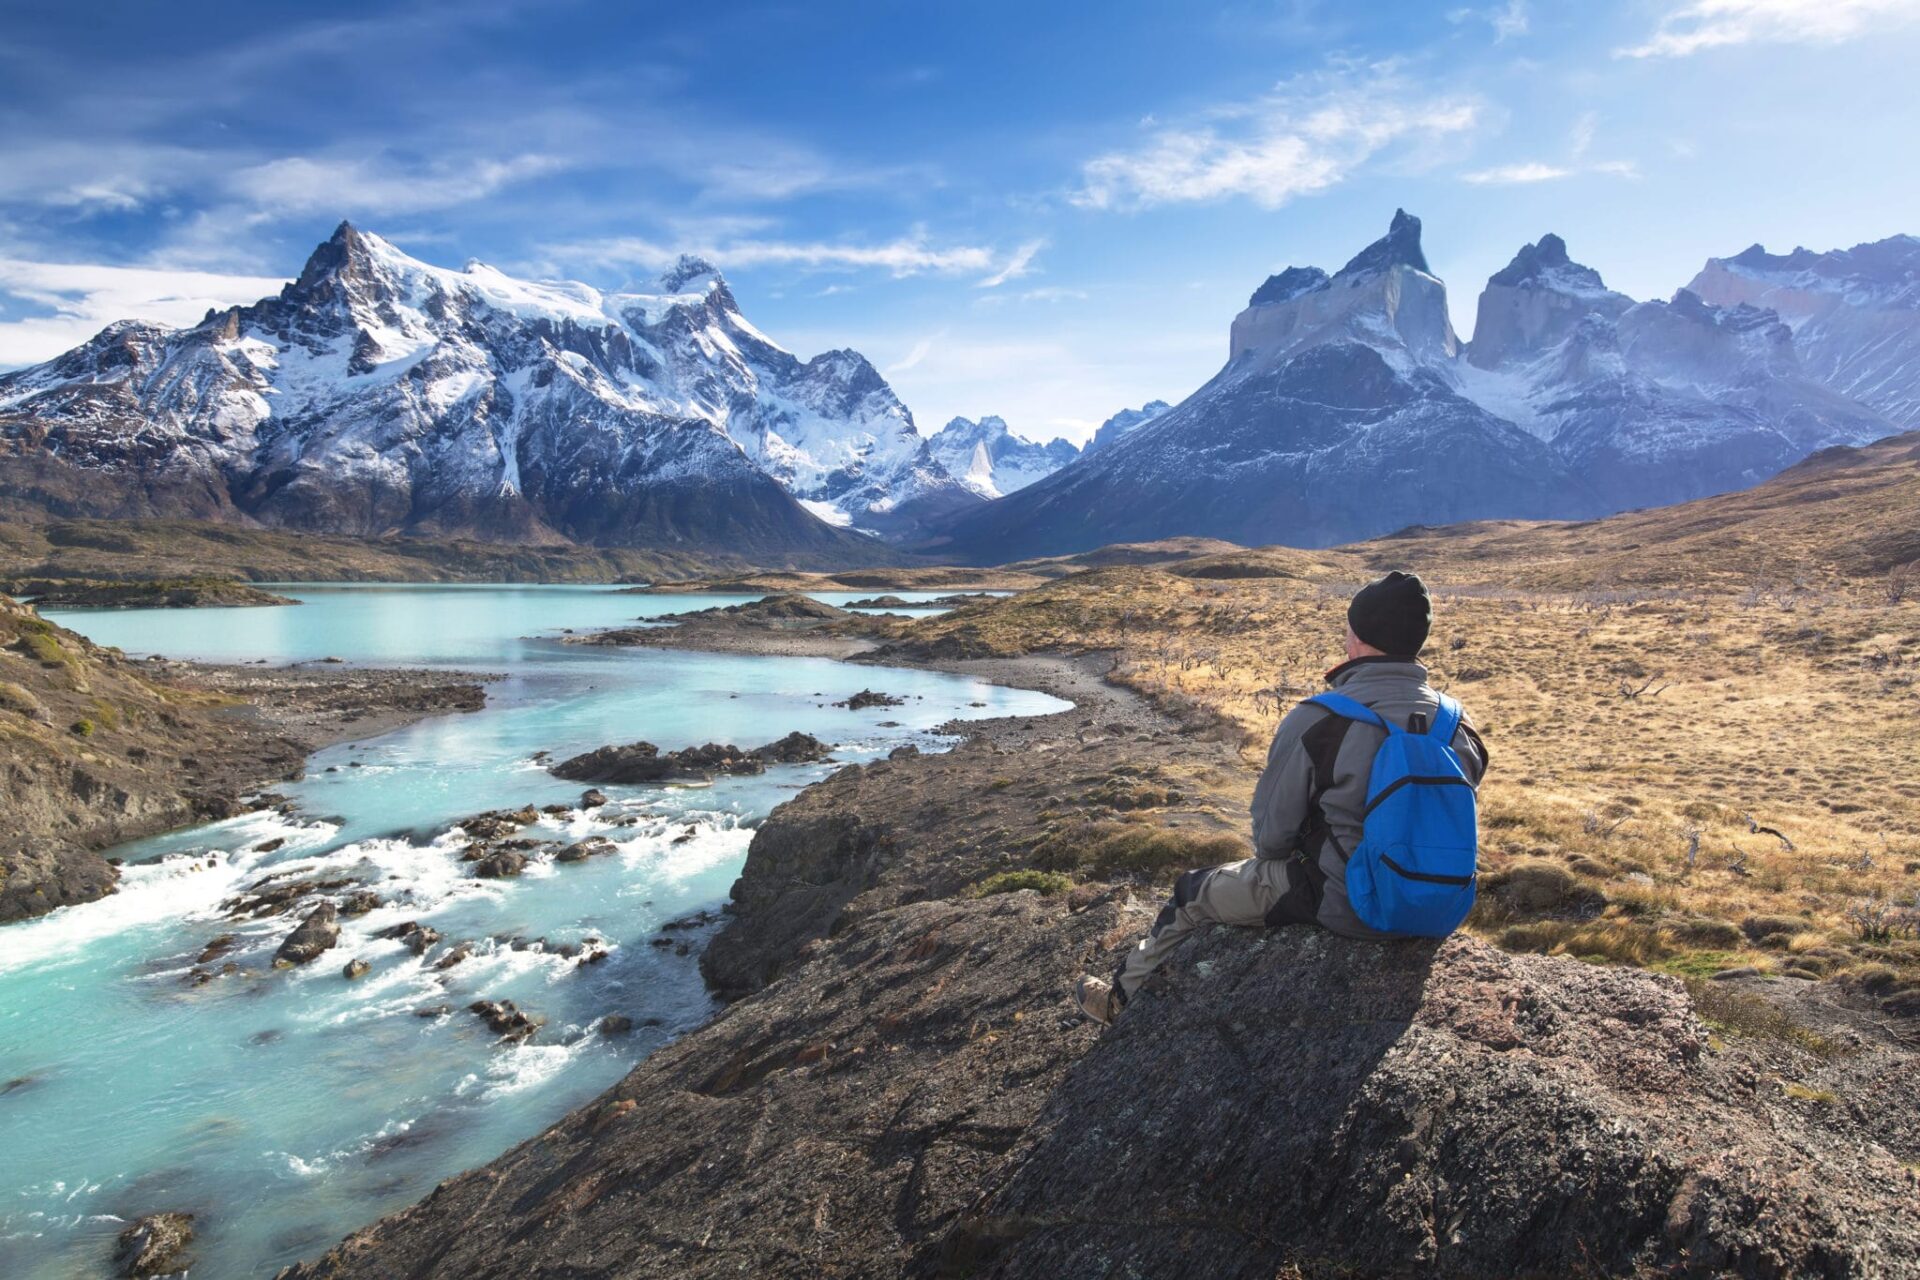 https://www.aurora-expeditions.com/wp-content/uploads/2019/12/torres-del-paine-national-park-scaled.jpg